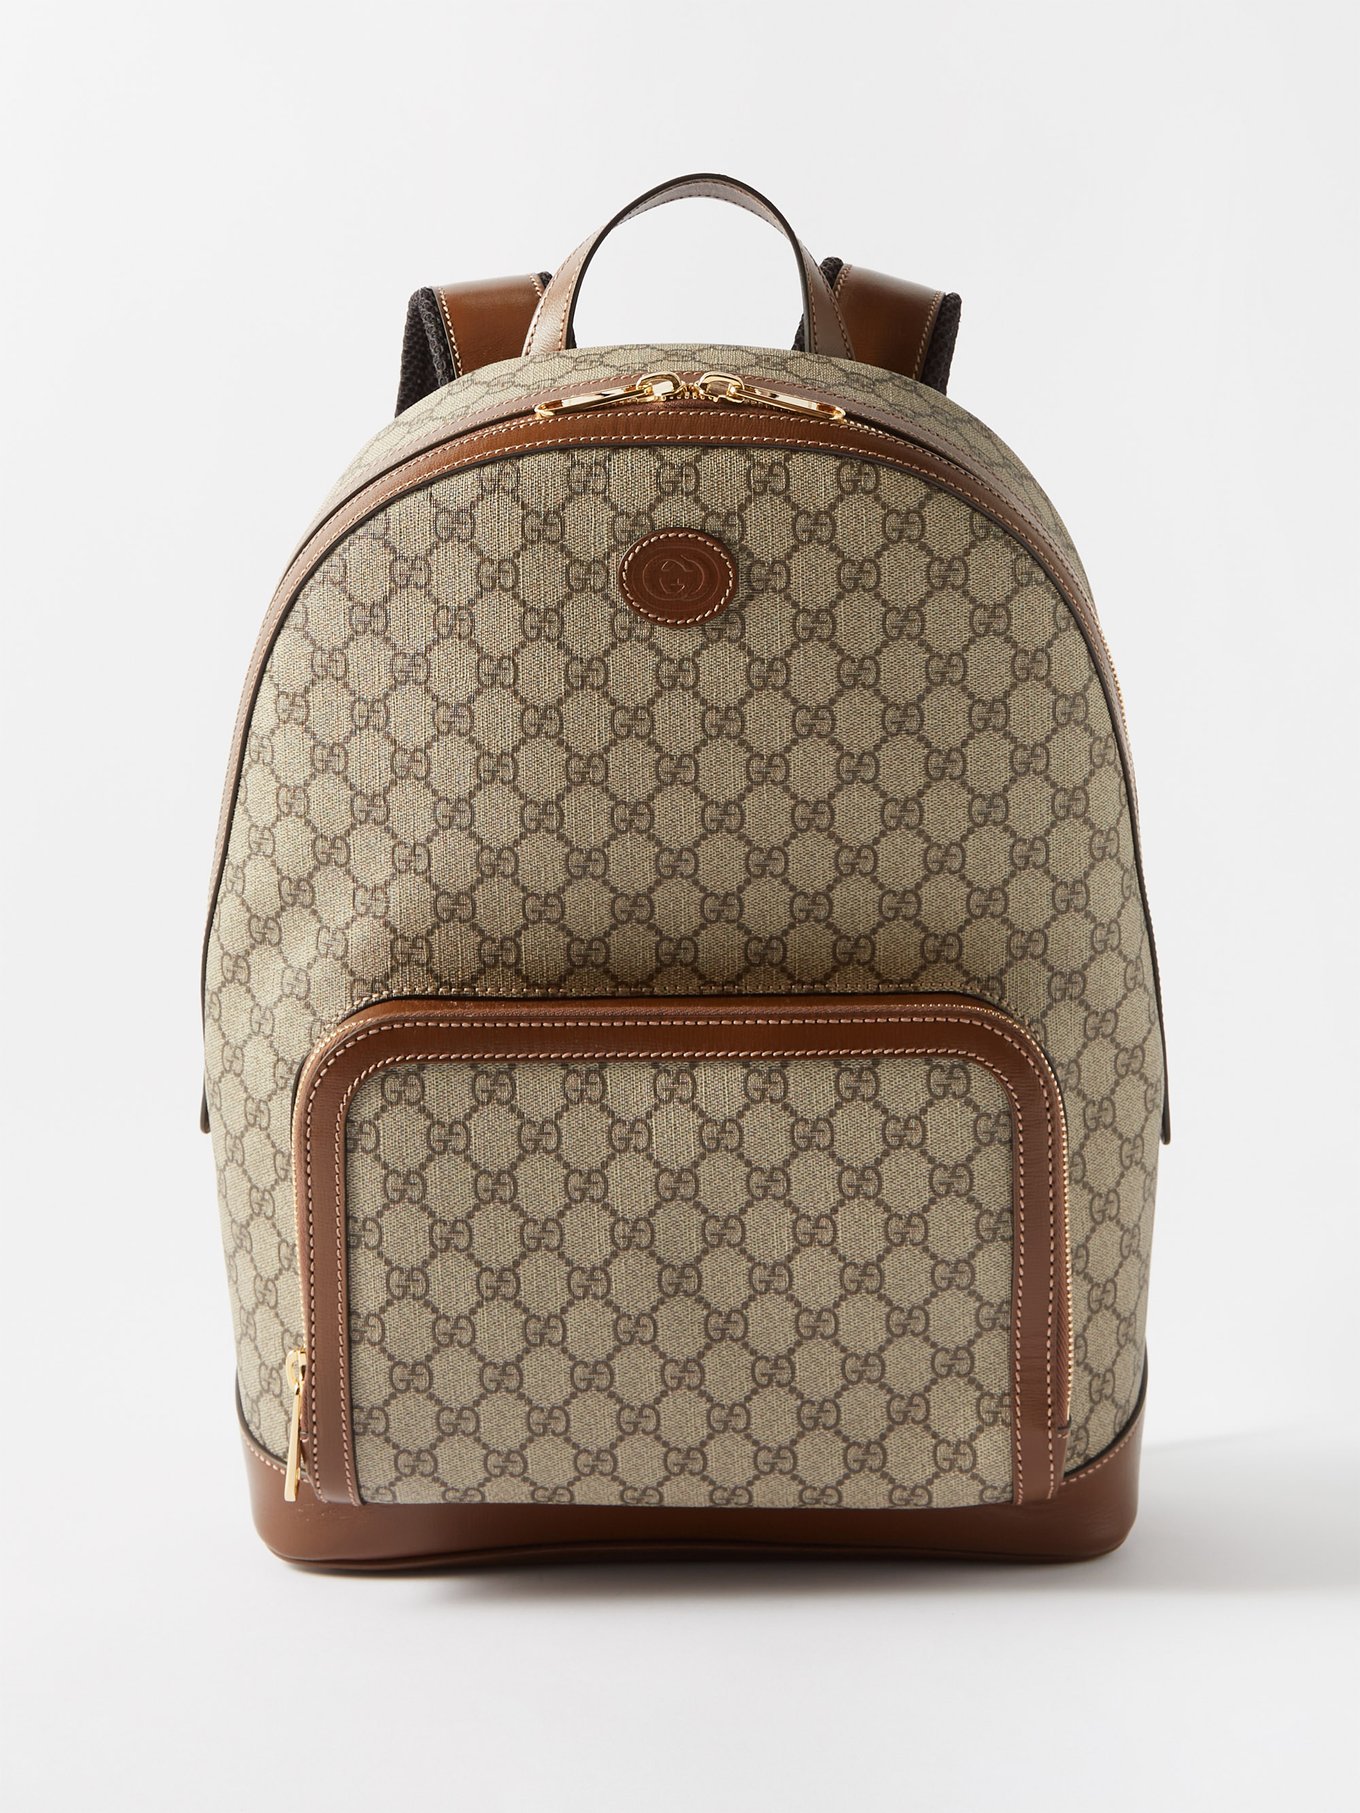 Replica Gucci Backpacks For Men And Women,Cheap Gucci Backpack At